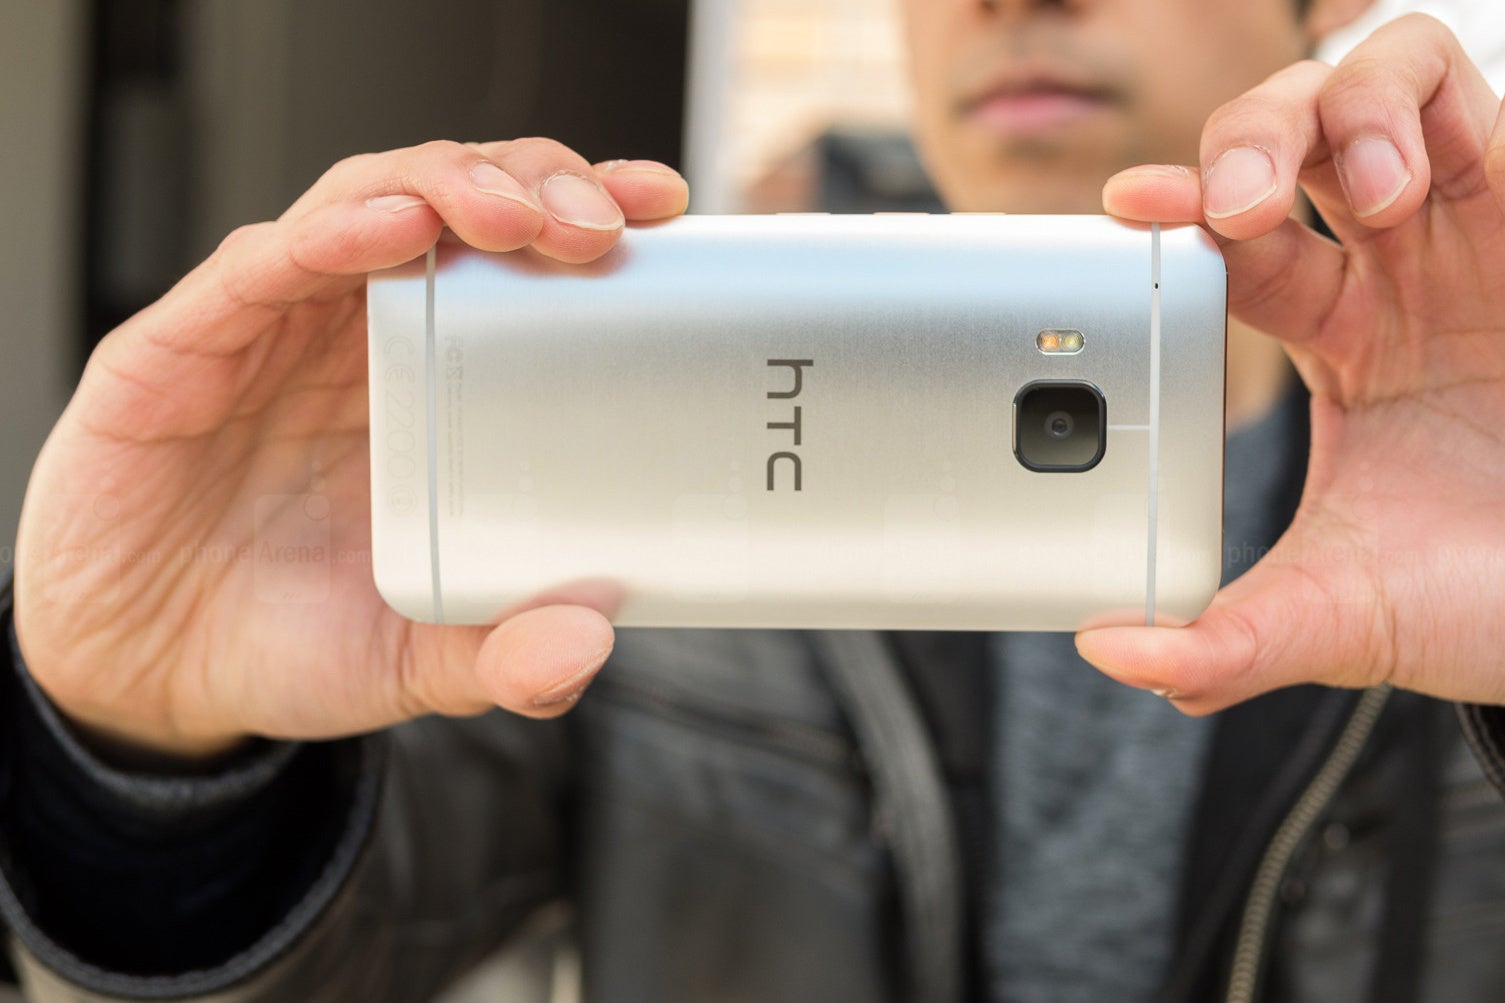 HTC's good fortune ends; brand reports lowest monthly revenue on record